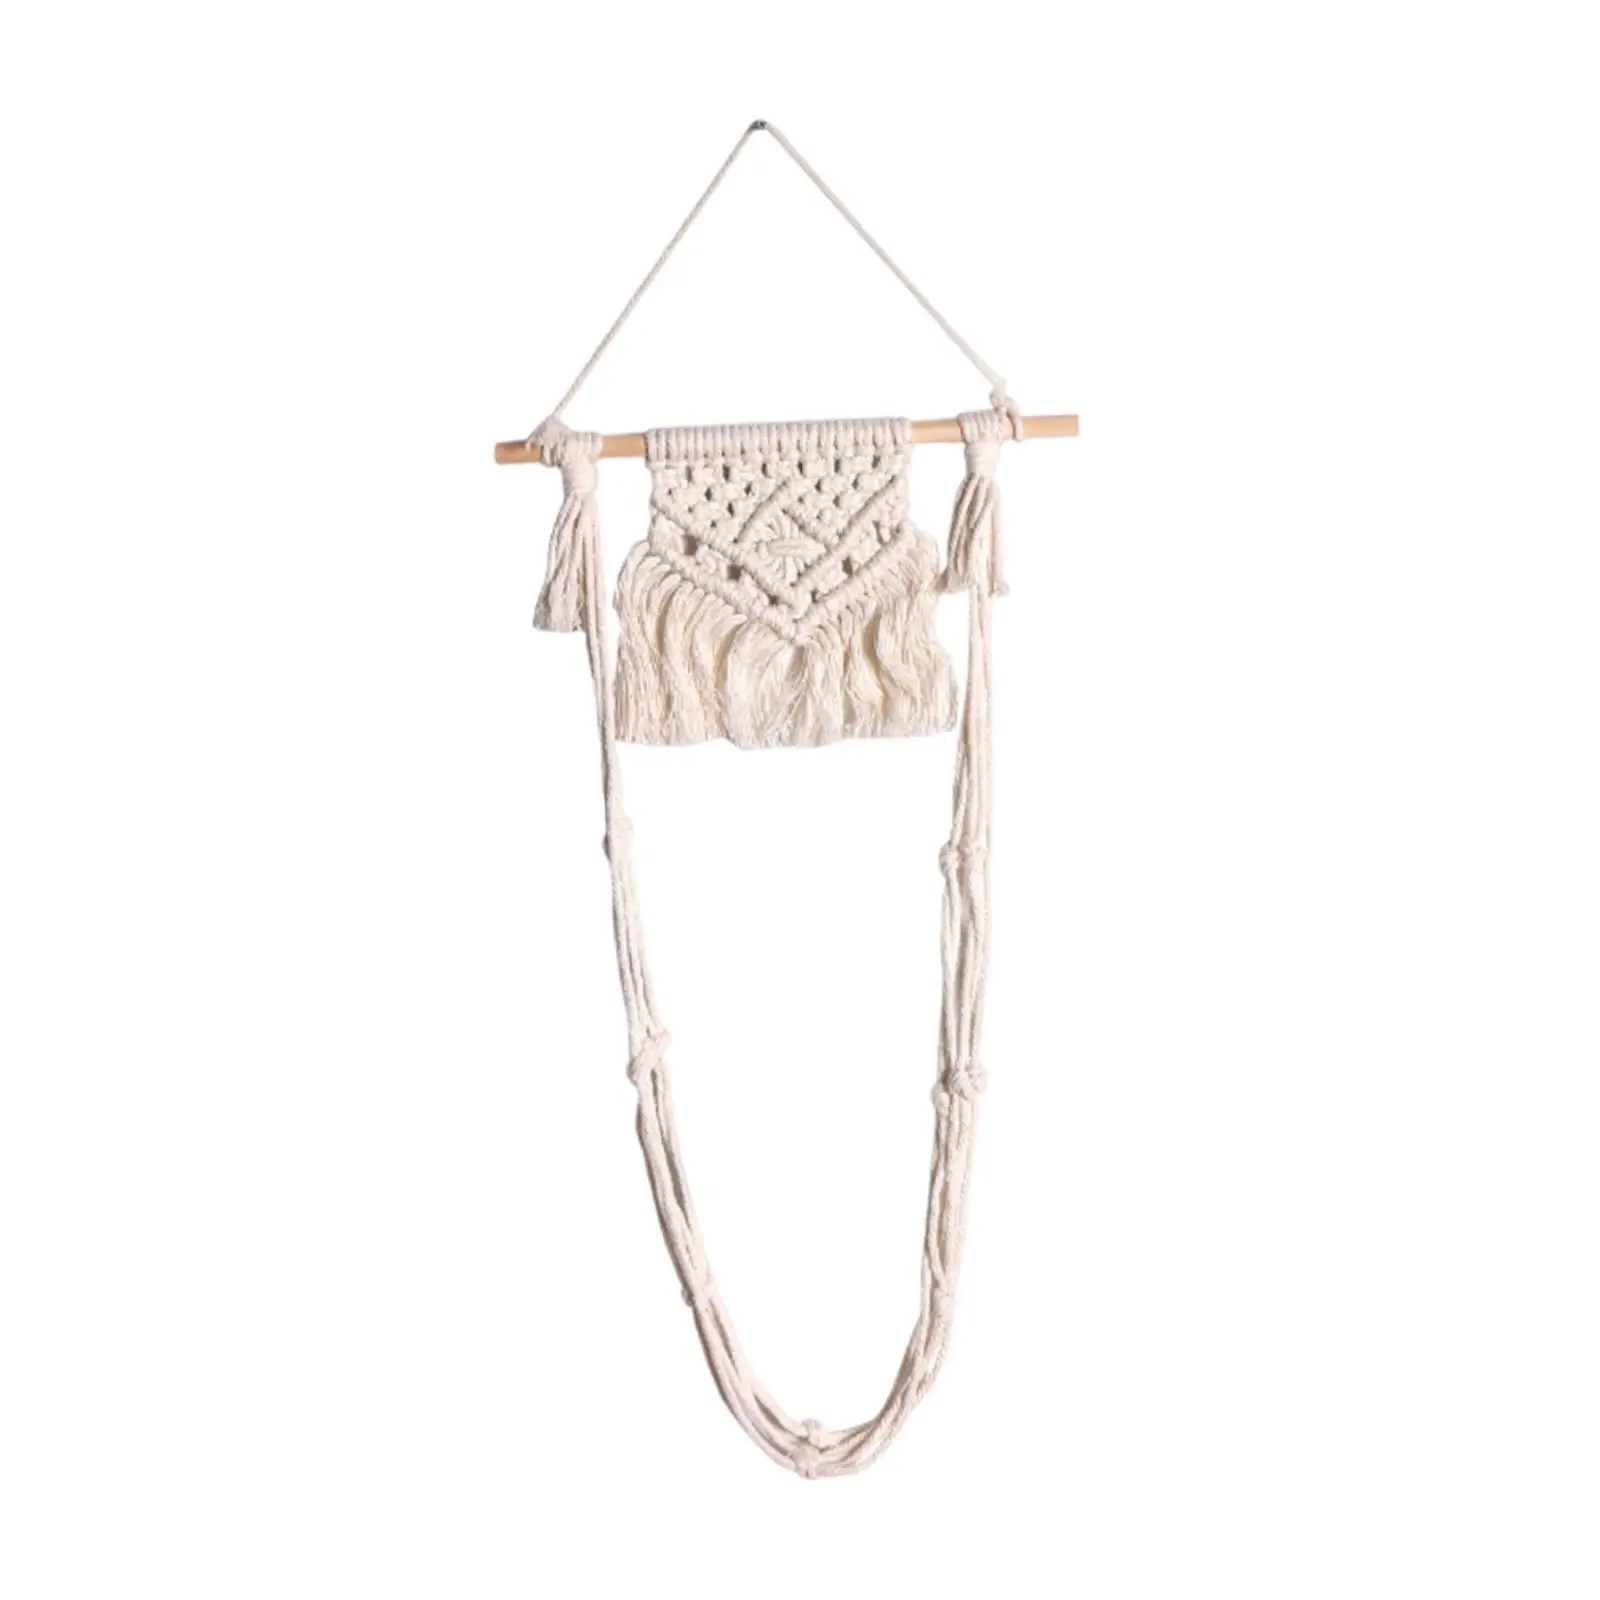 Paper Roll Holder Wooden Macrame Wall Mounted Toilet Paper Holder for Farmhouse